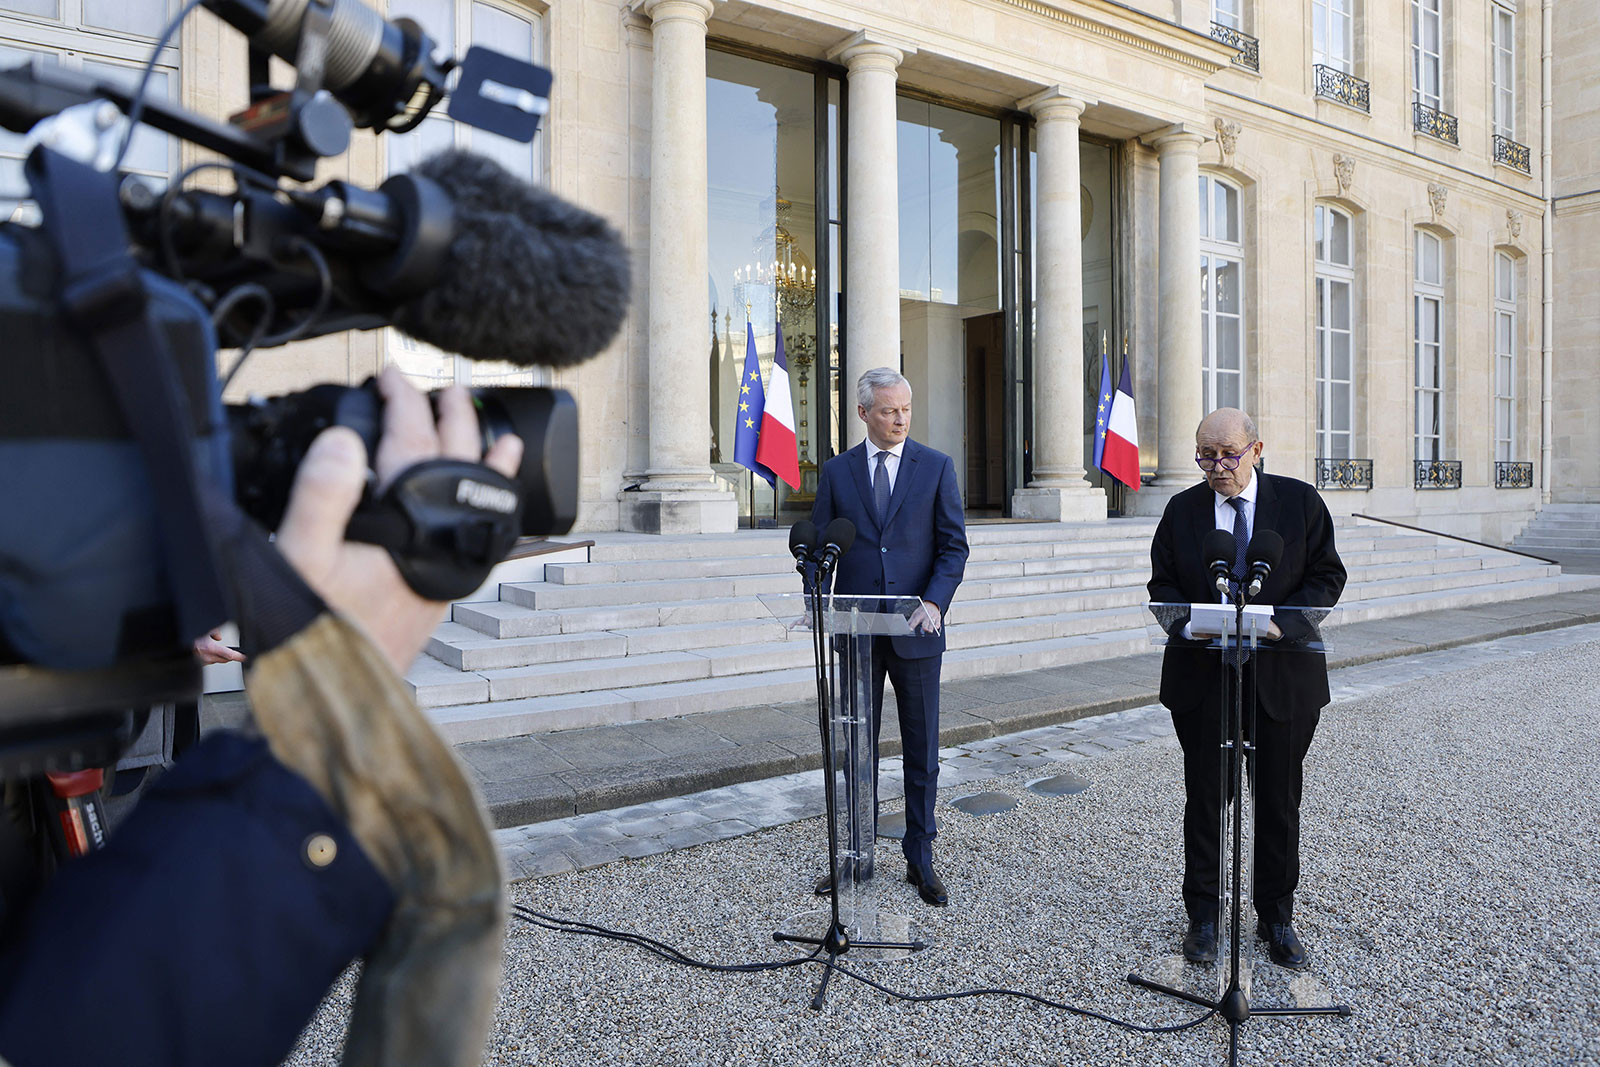 France's Foreign Minister Jean-Yves Le Drian, right, speaks during a press conference in Paris on February 28.